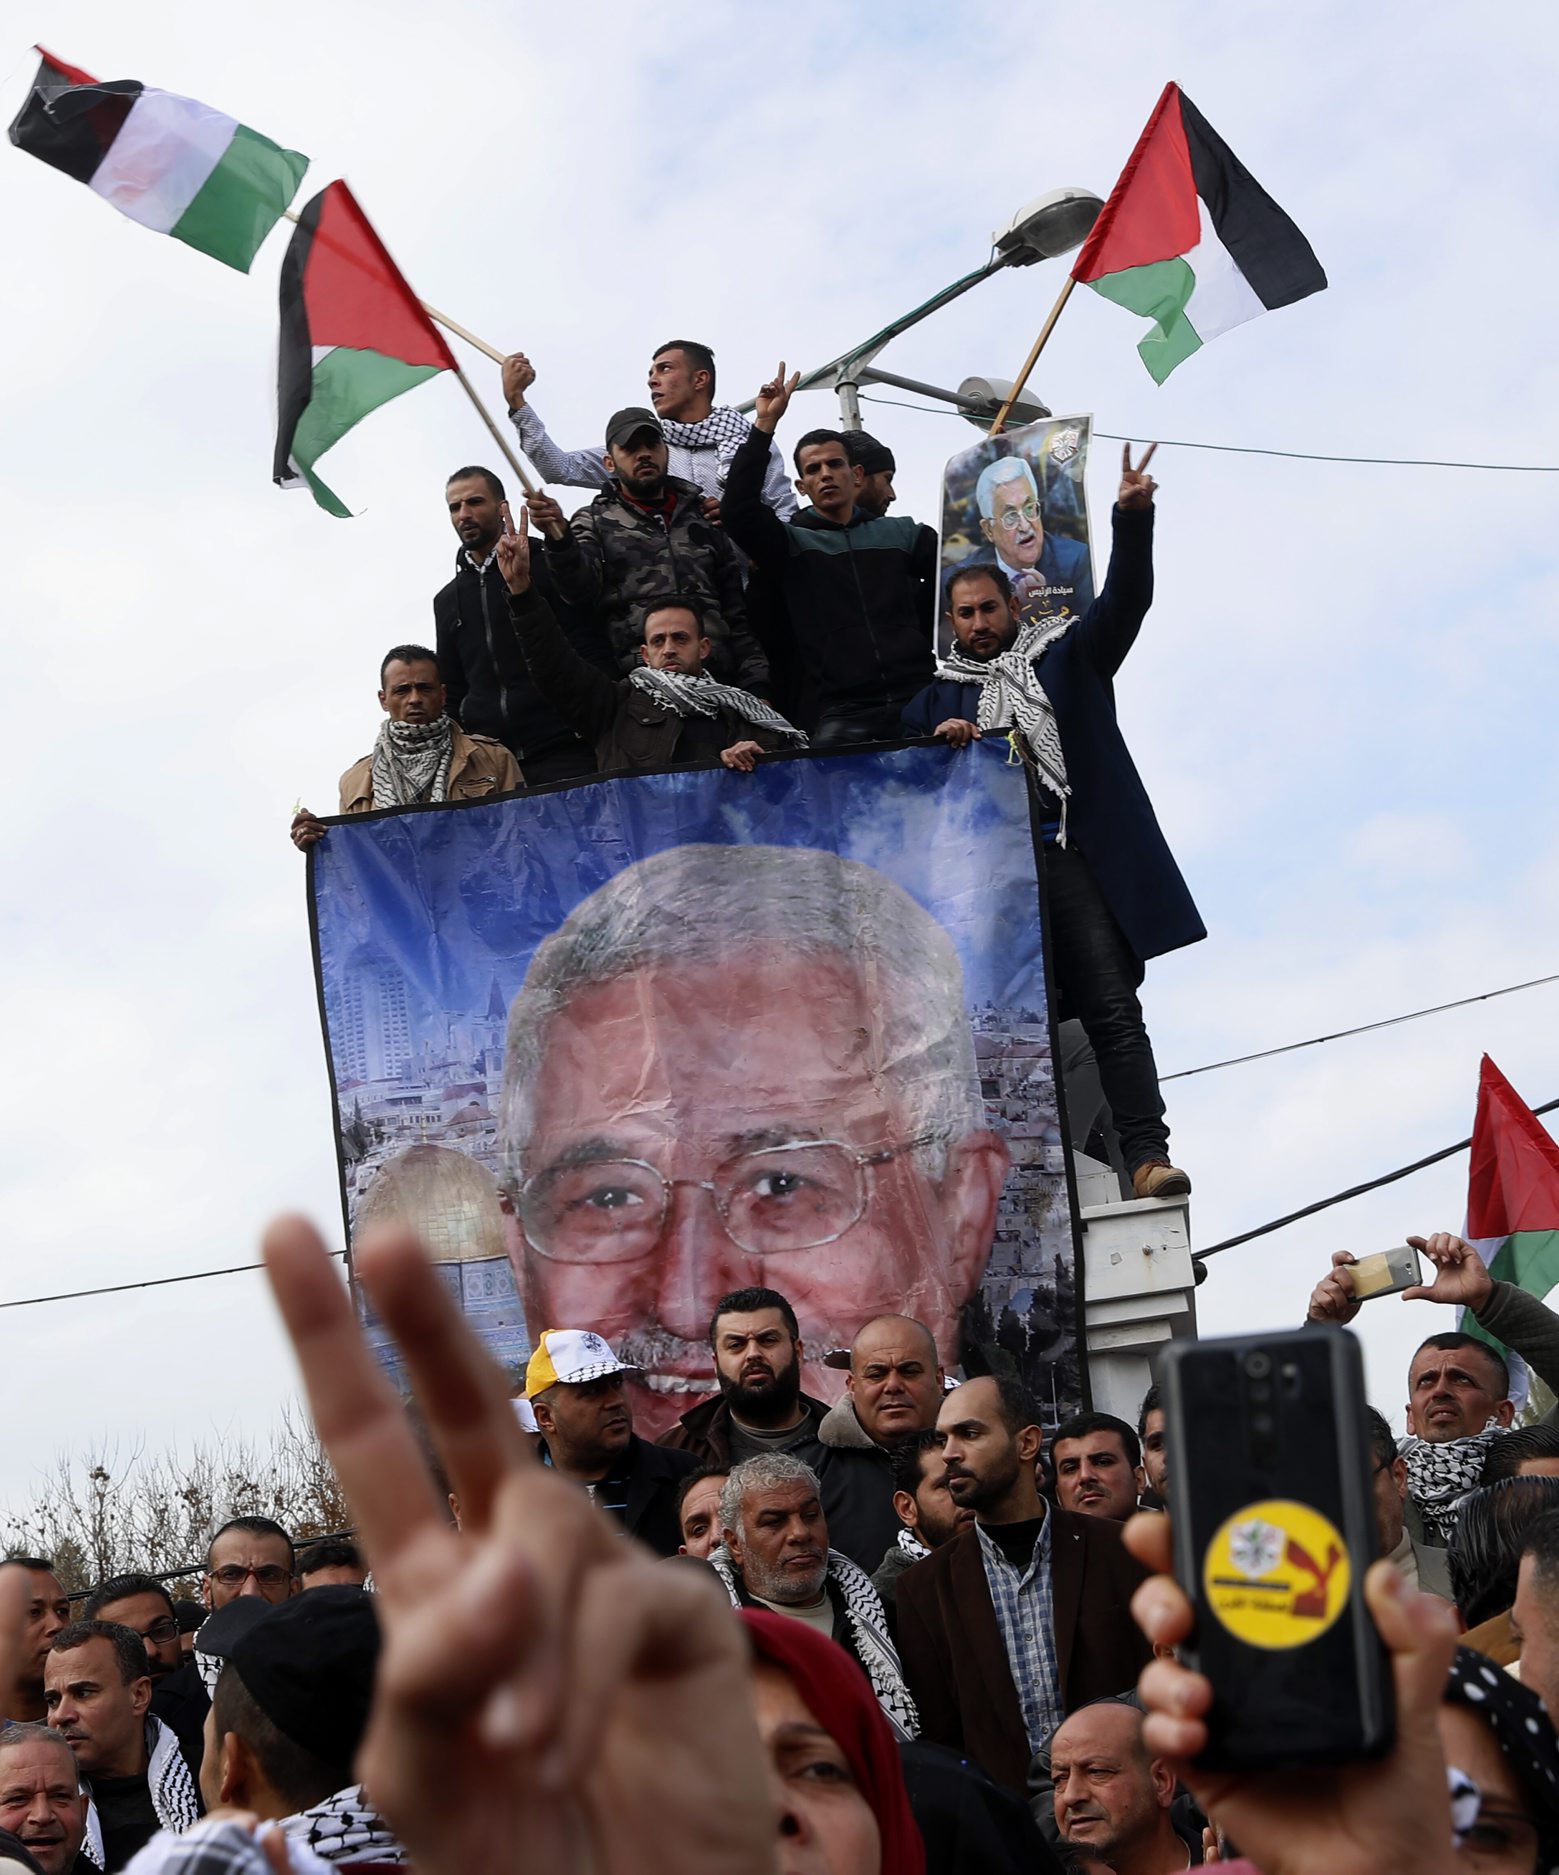 Protestors wave Palestinian flags during a rally supporting Palestinian President Mahmoud Abbas, shown in banner, and against the Mideast plan announced by U.S. President Donald Trump, at the Unknown Soldier Square in Gaza City, Tuesday, Feb. 11, 2020. (AP Photo/Adel Hana) Palestinians Israel US